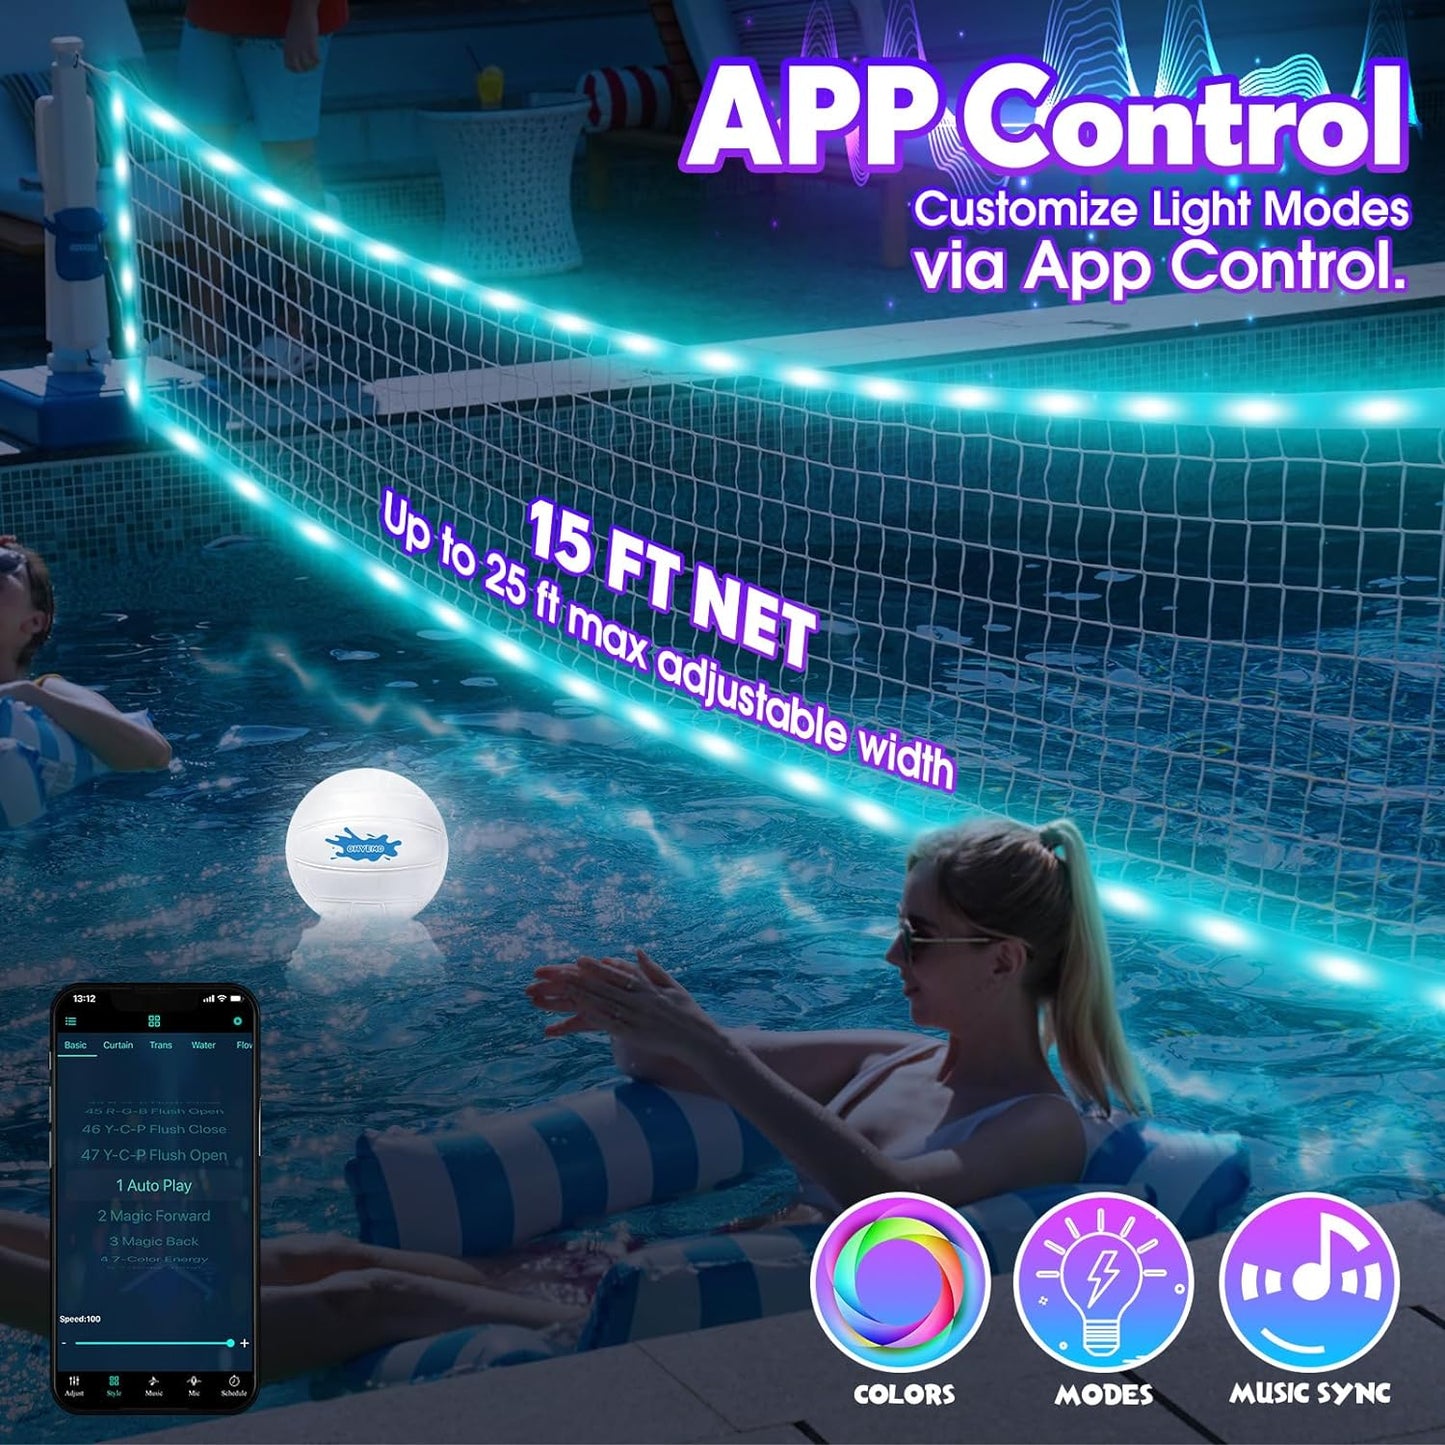 OHYEMO 2-in-1 LED Pool Volleyball & Basketball Game Set